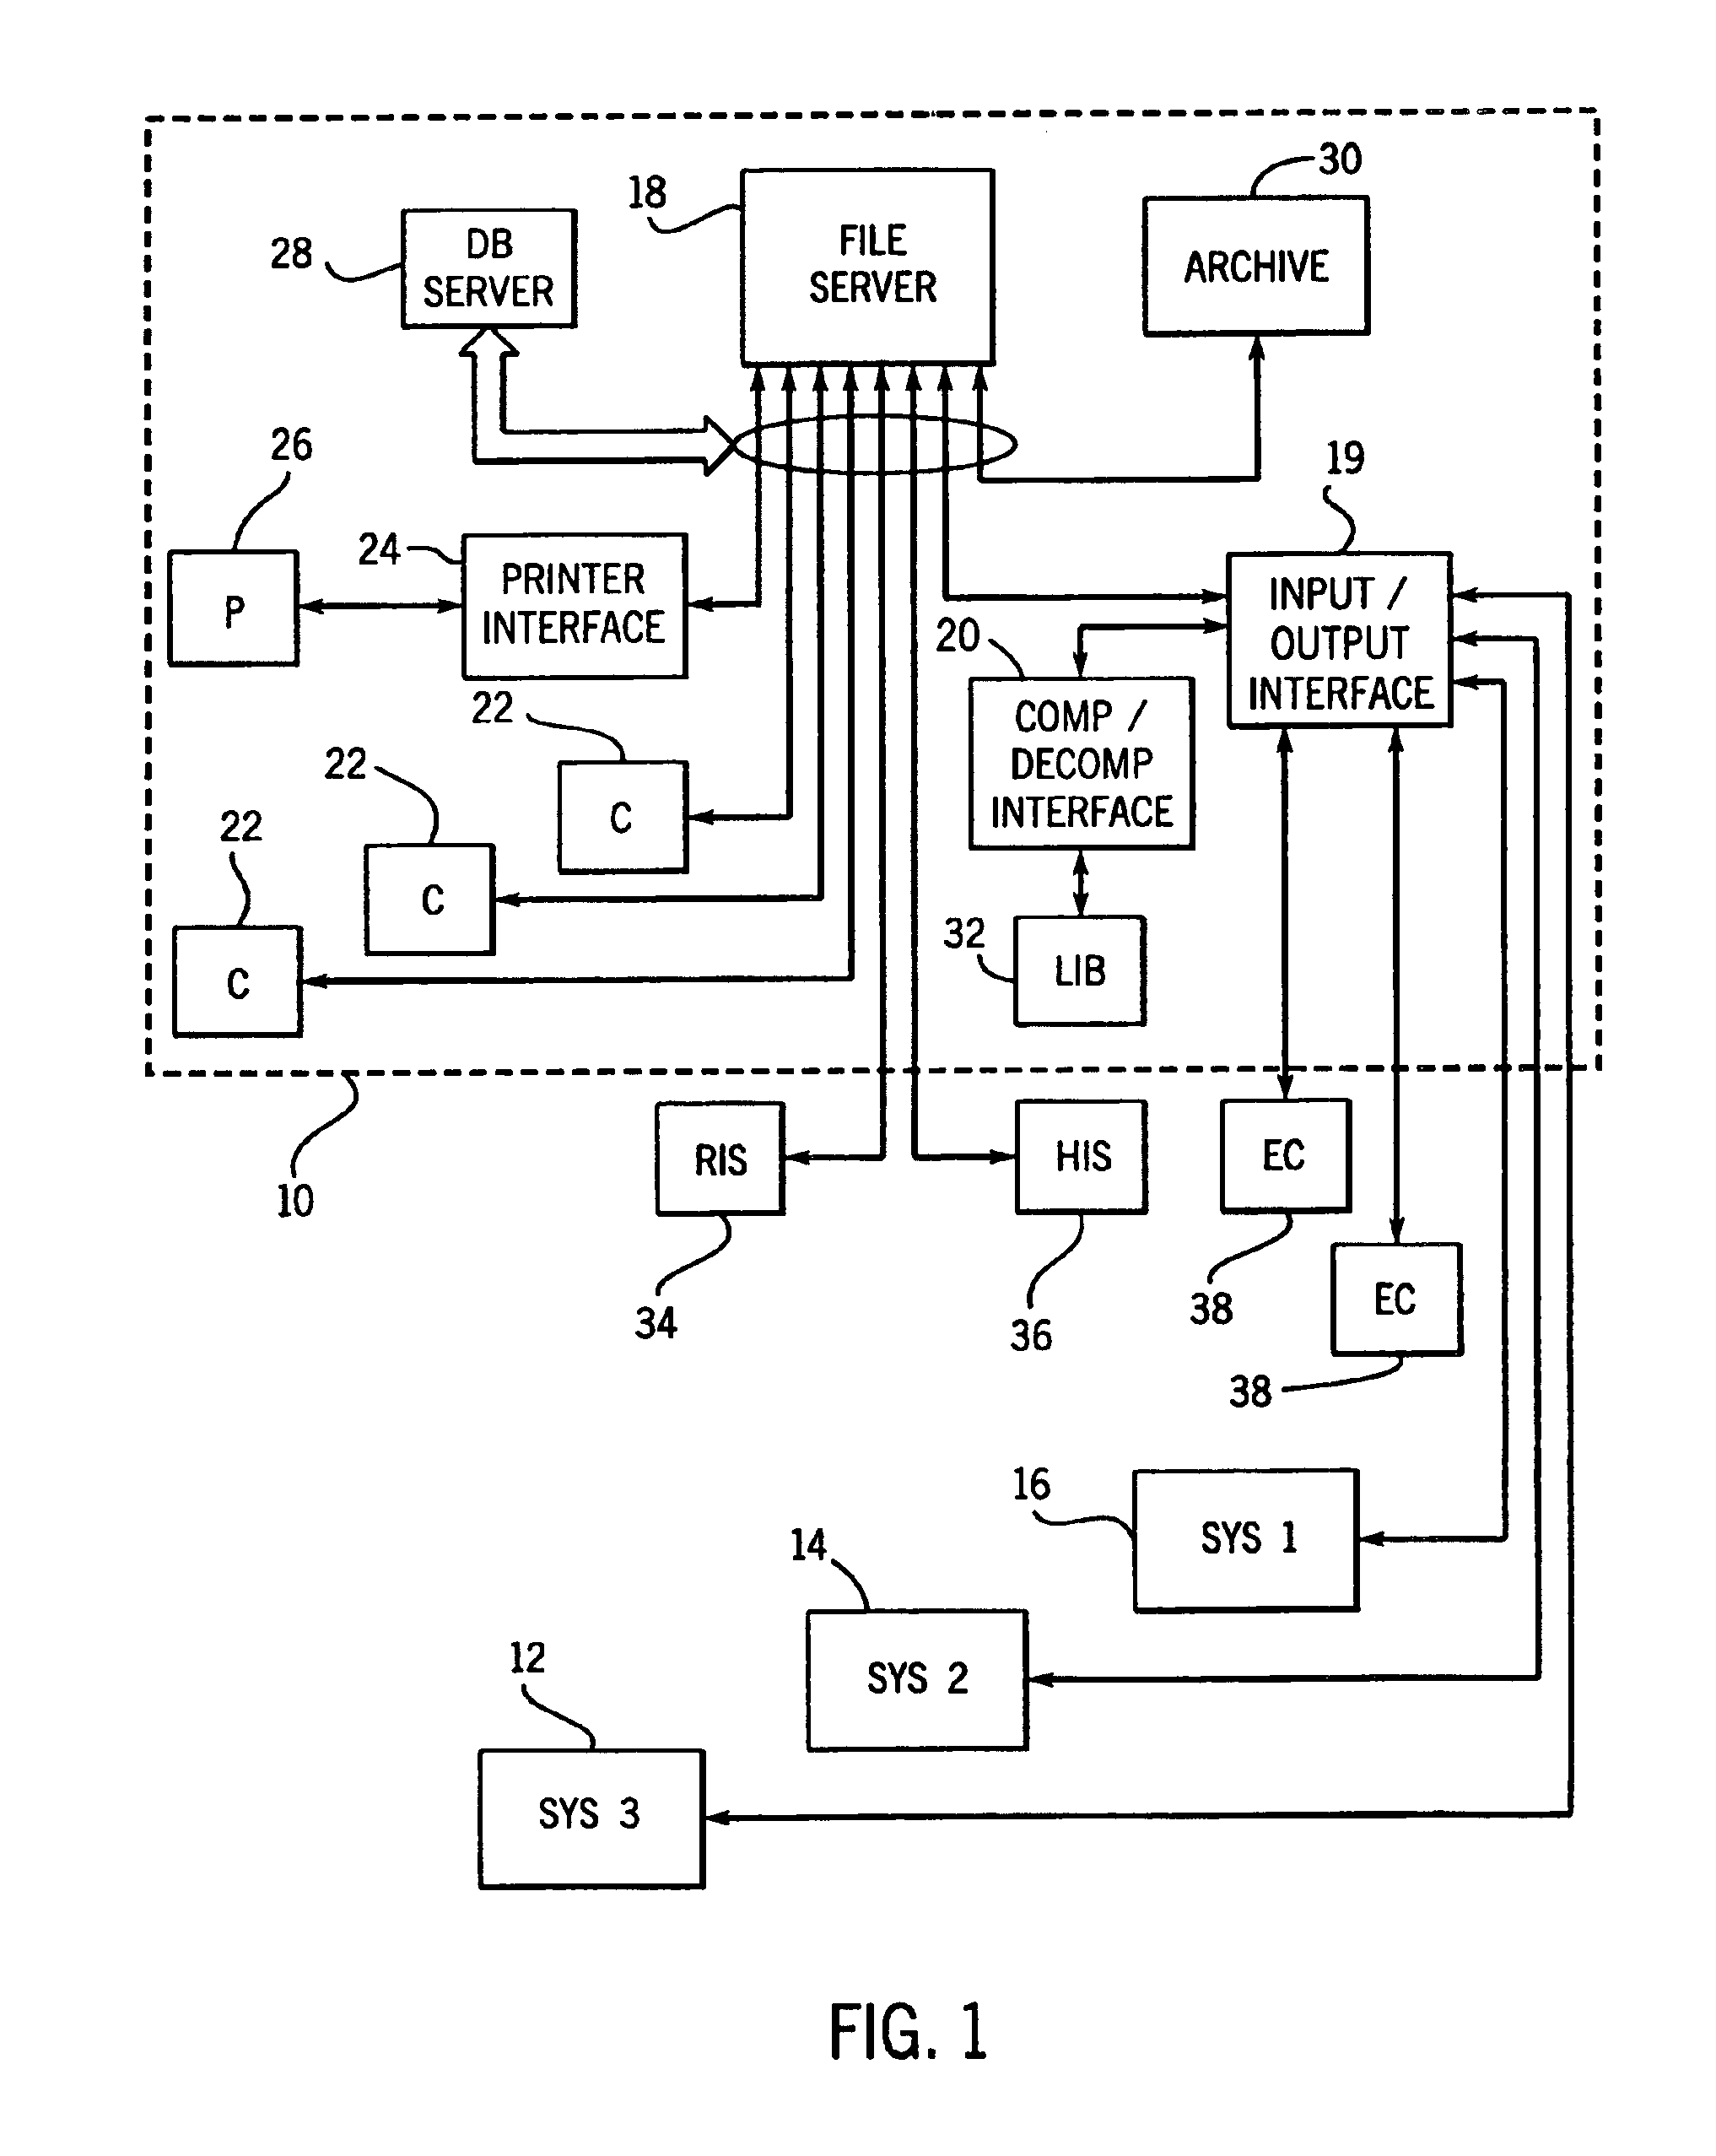 Method and system for lossless wavelet decomposition, compression and decompression of data